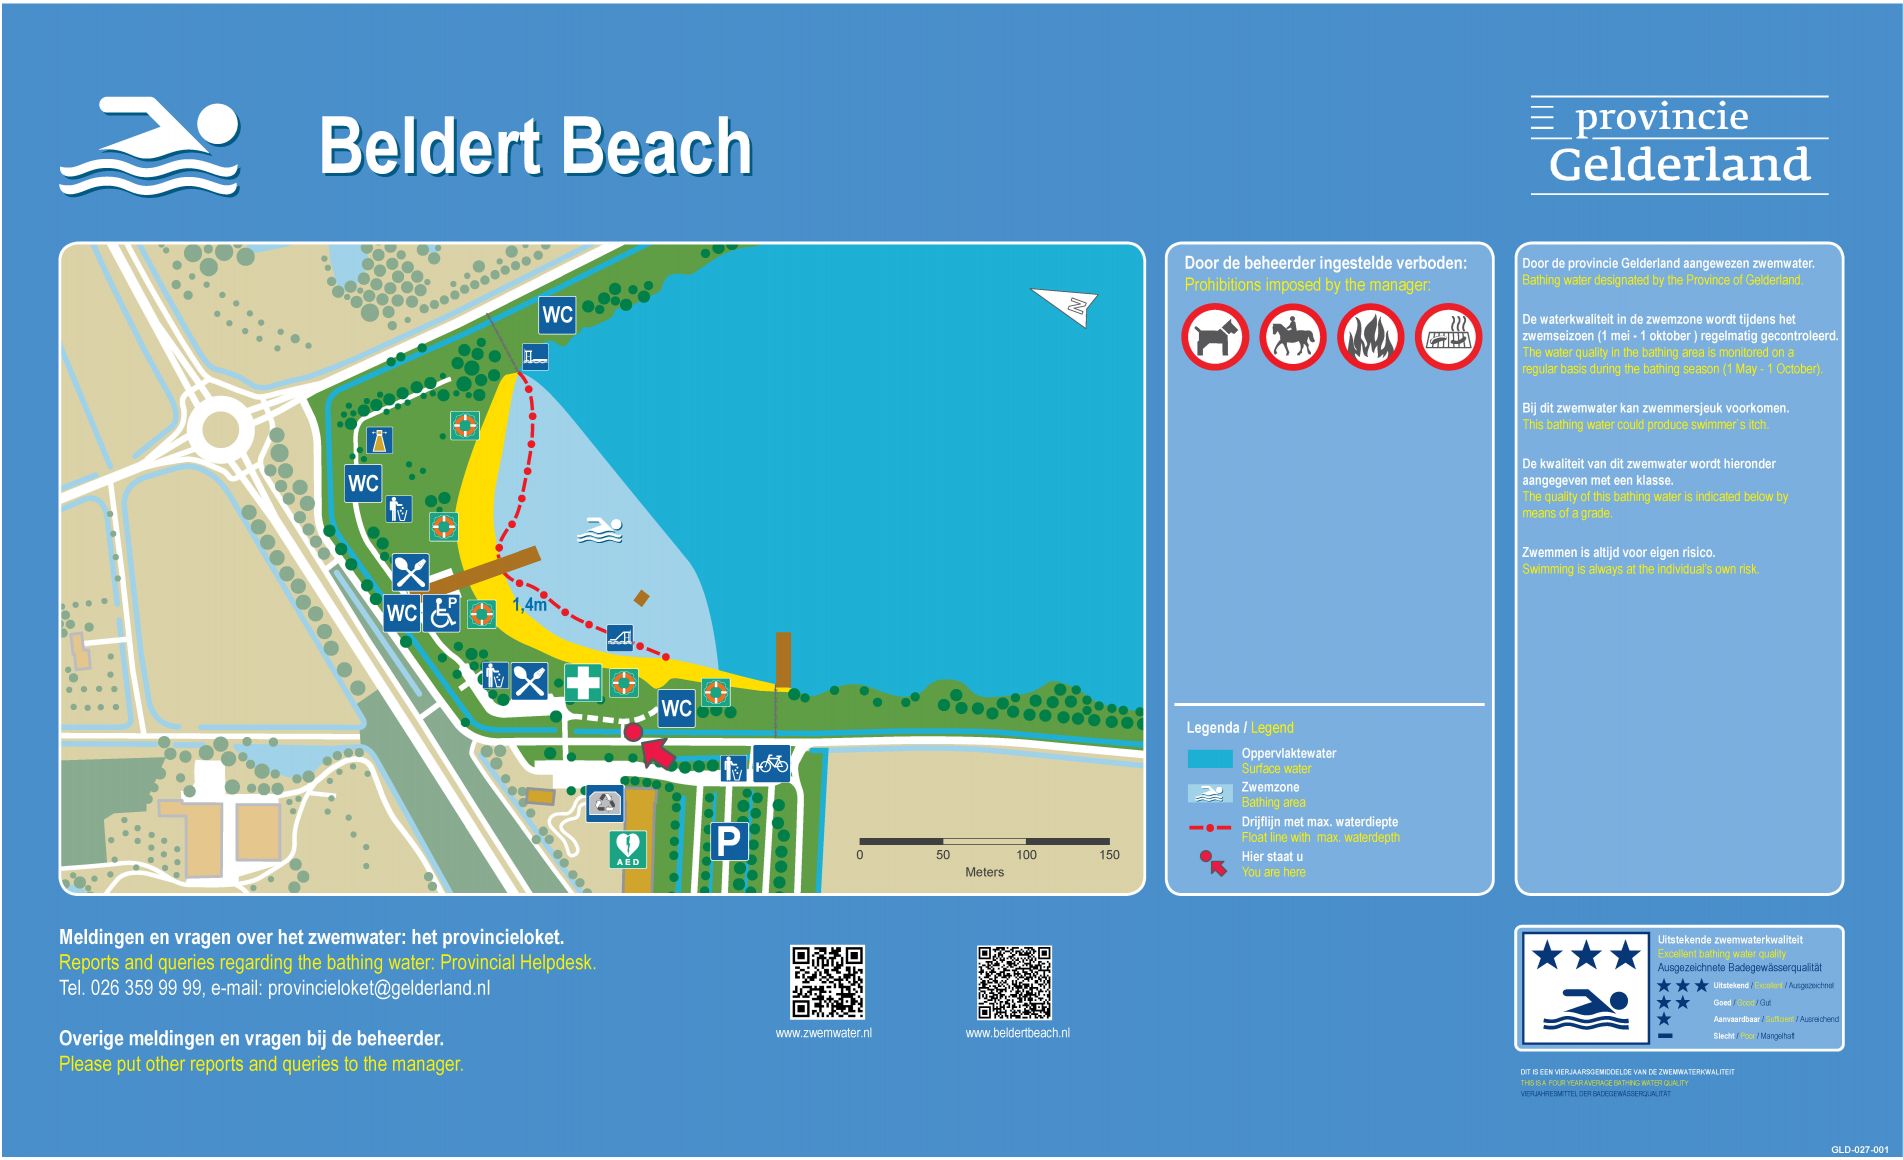 The information board at the swimming location Beldert Beach